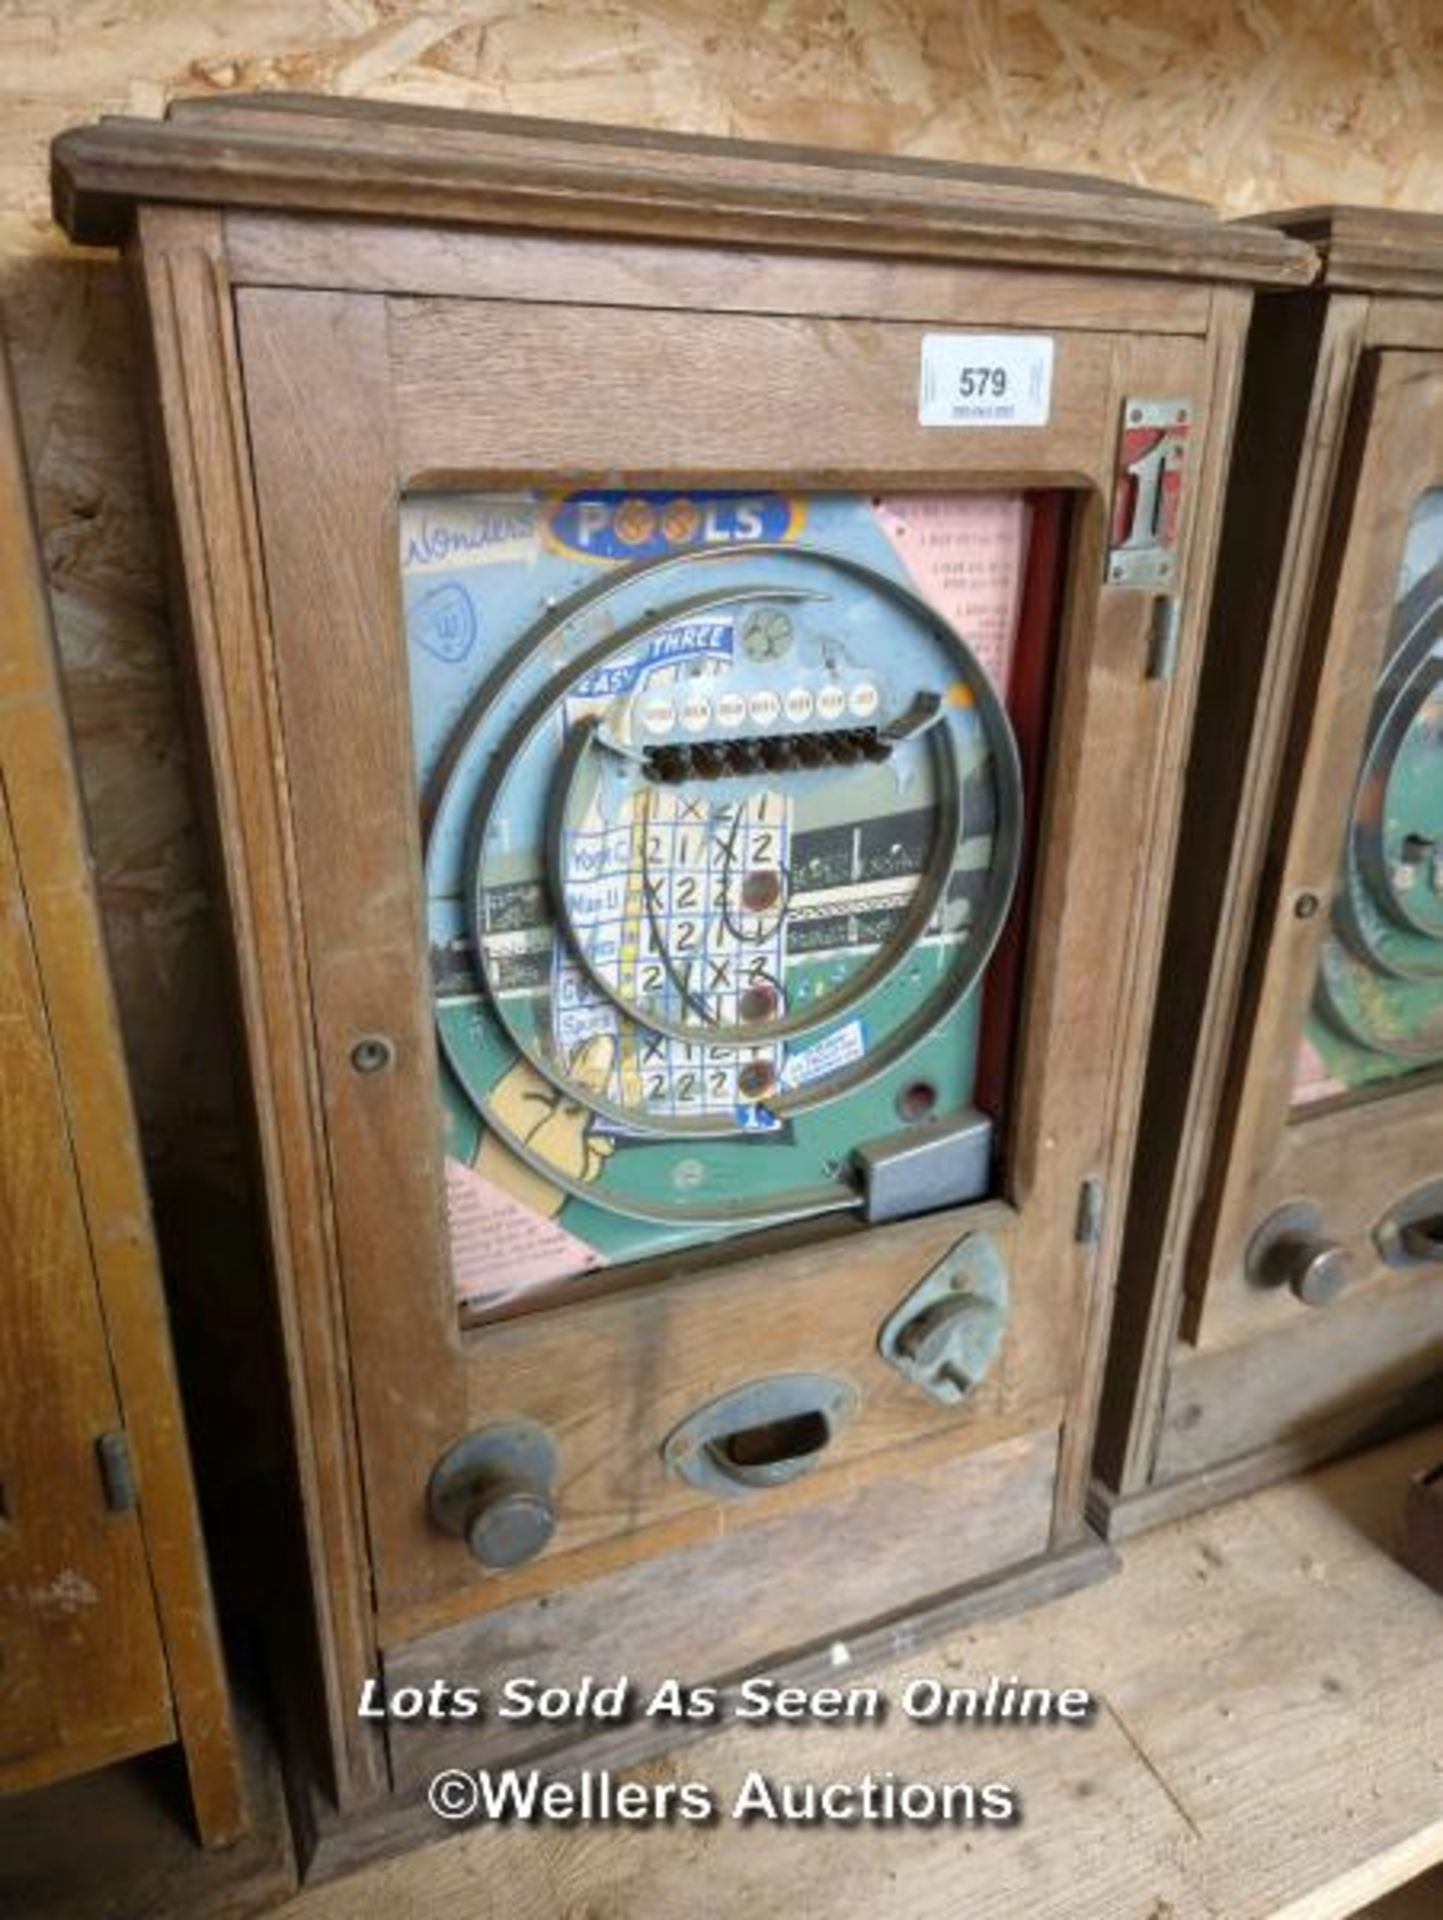 *VINTAGE FUN FAIR WONDERS 'POOLS' SLOT MACHINE / ALL LOTS ARE LOCATED AT AUTHENTIC RECLAMATION TN5